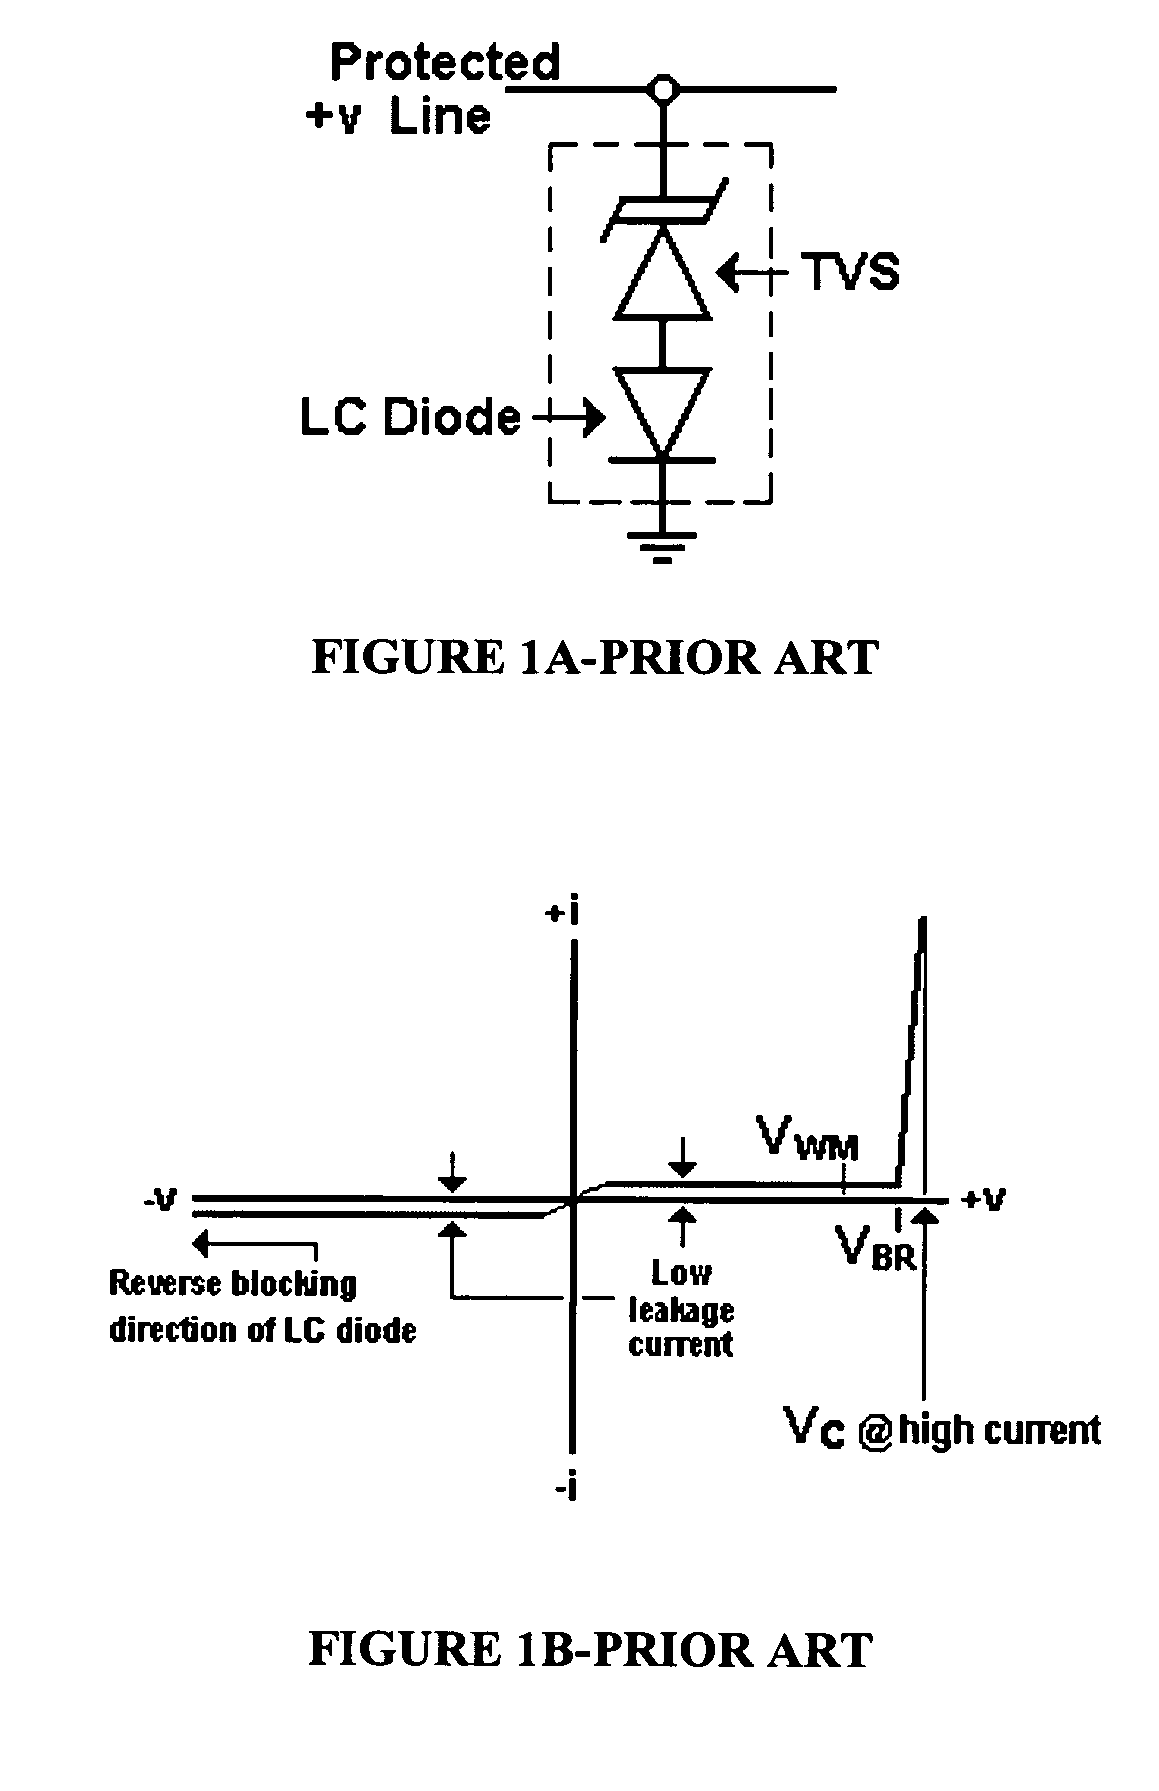 Device for protecting I/O lines using PIN or NIP conducting low capacitance transient voltage suppressors and steering diodes